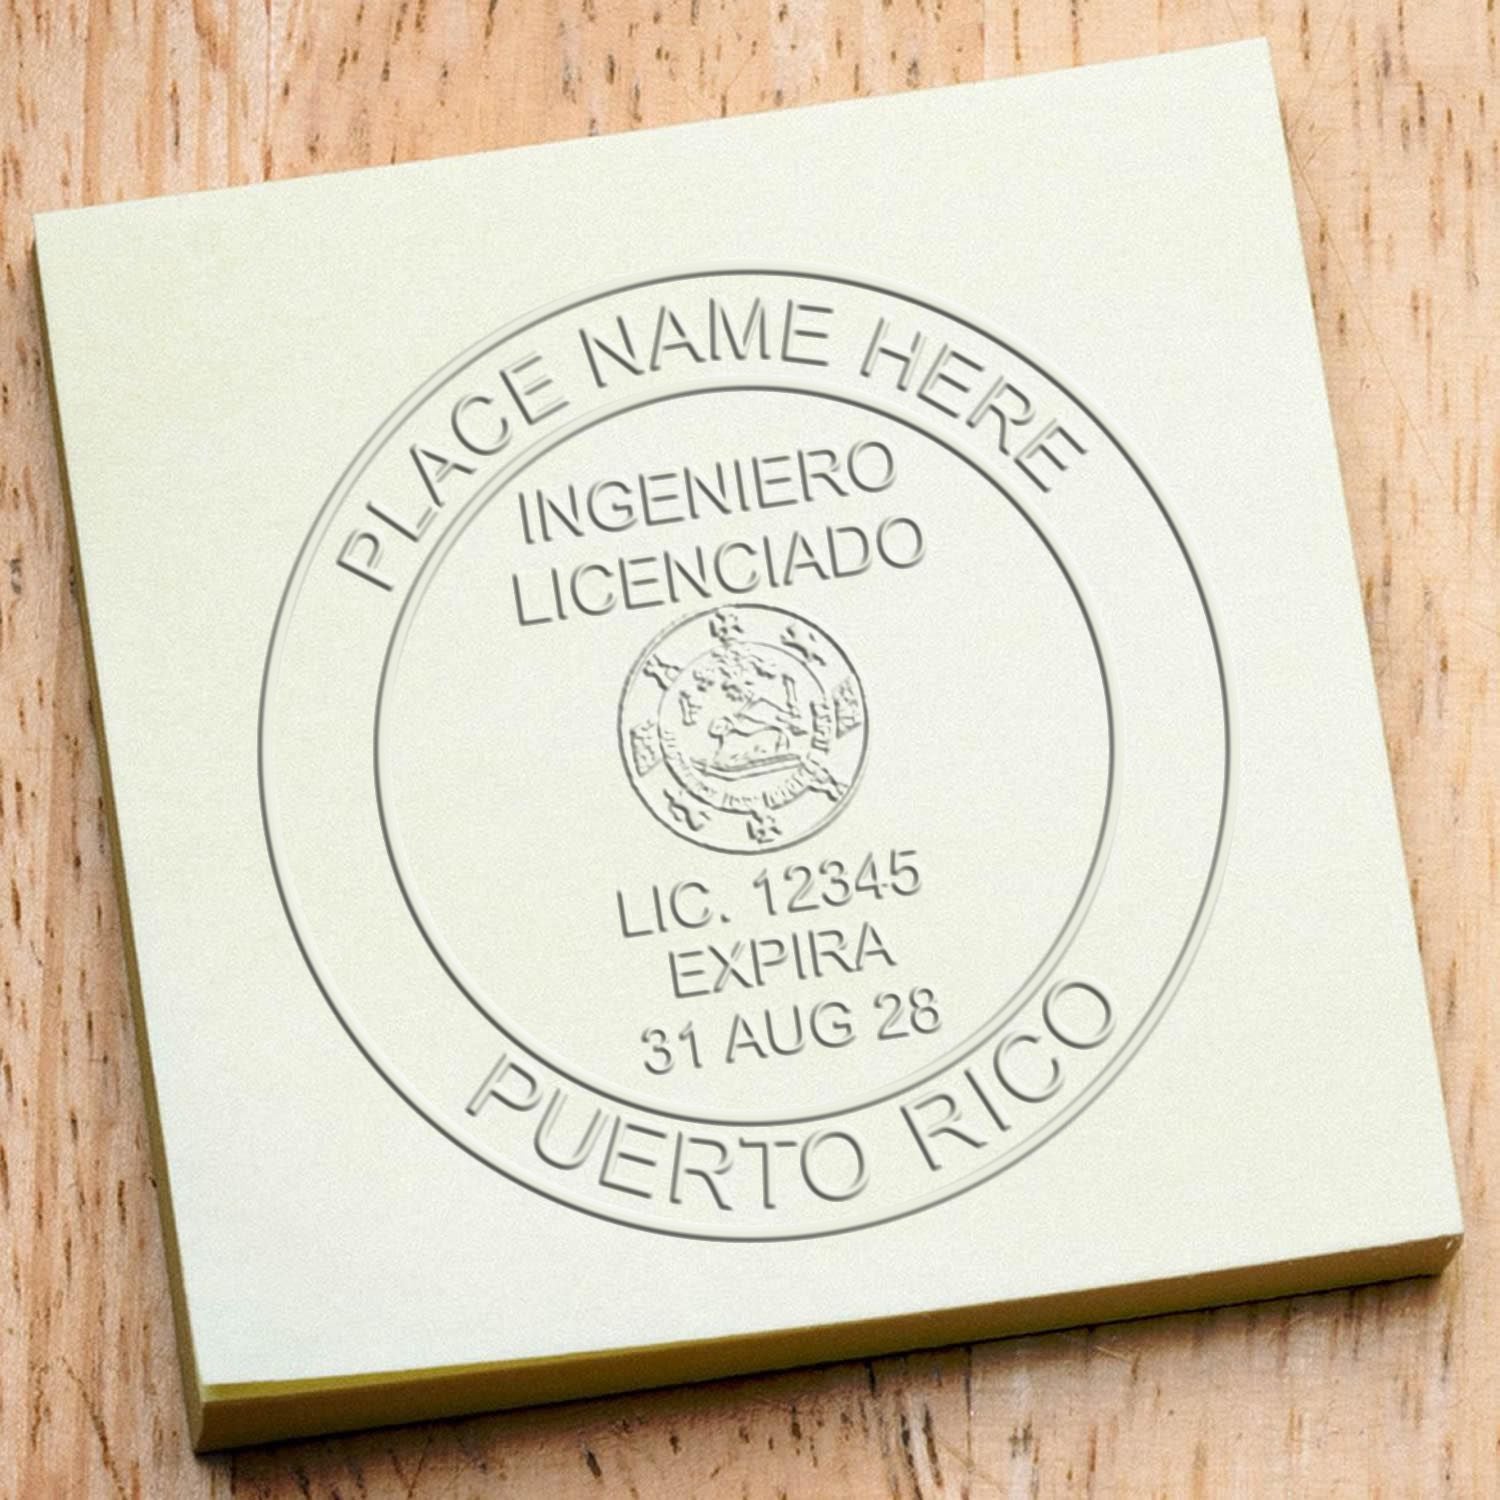 An alternative view of the State of Puerto Rico Extended Long Reach Engineer Seal stamped on a sheet of paper showing the image in use